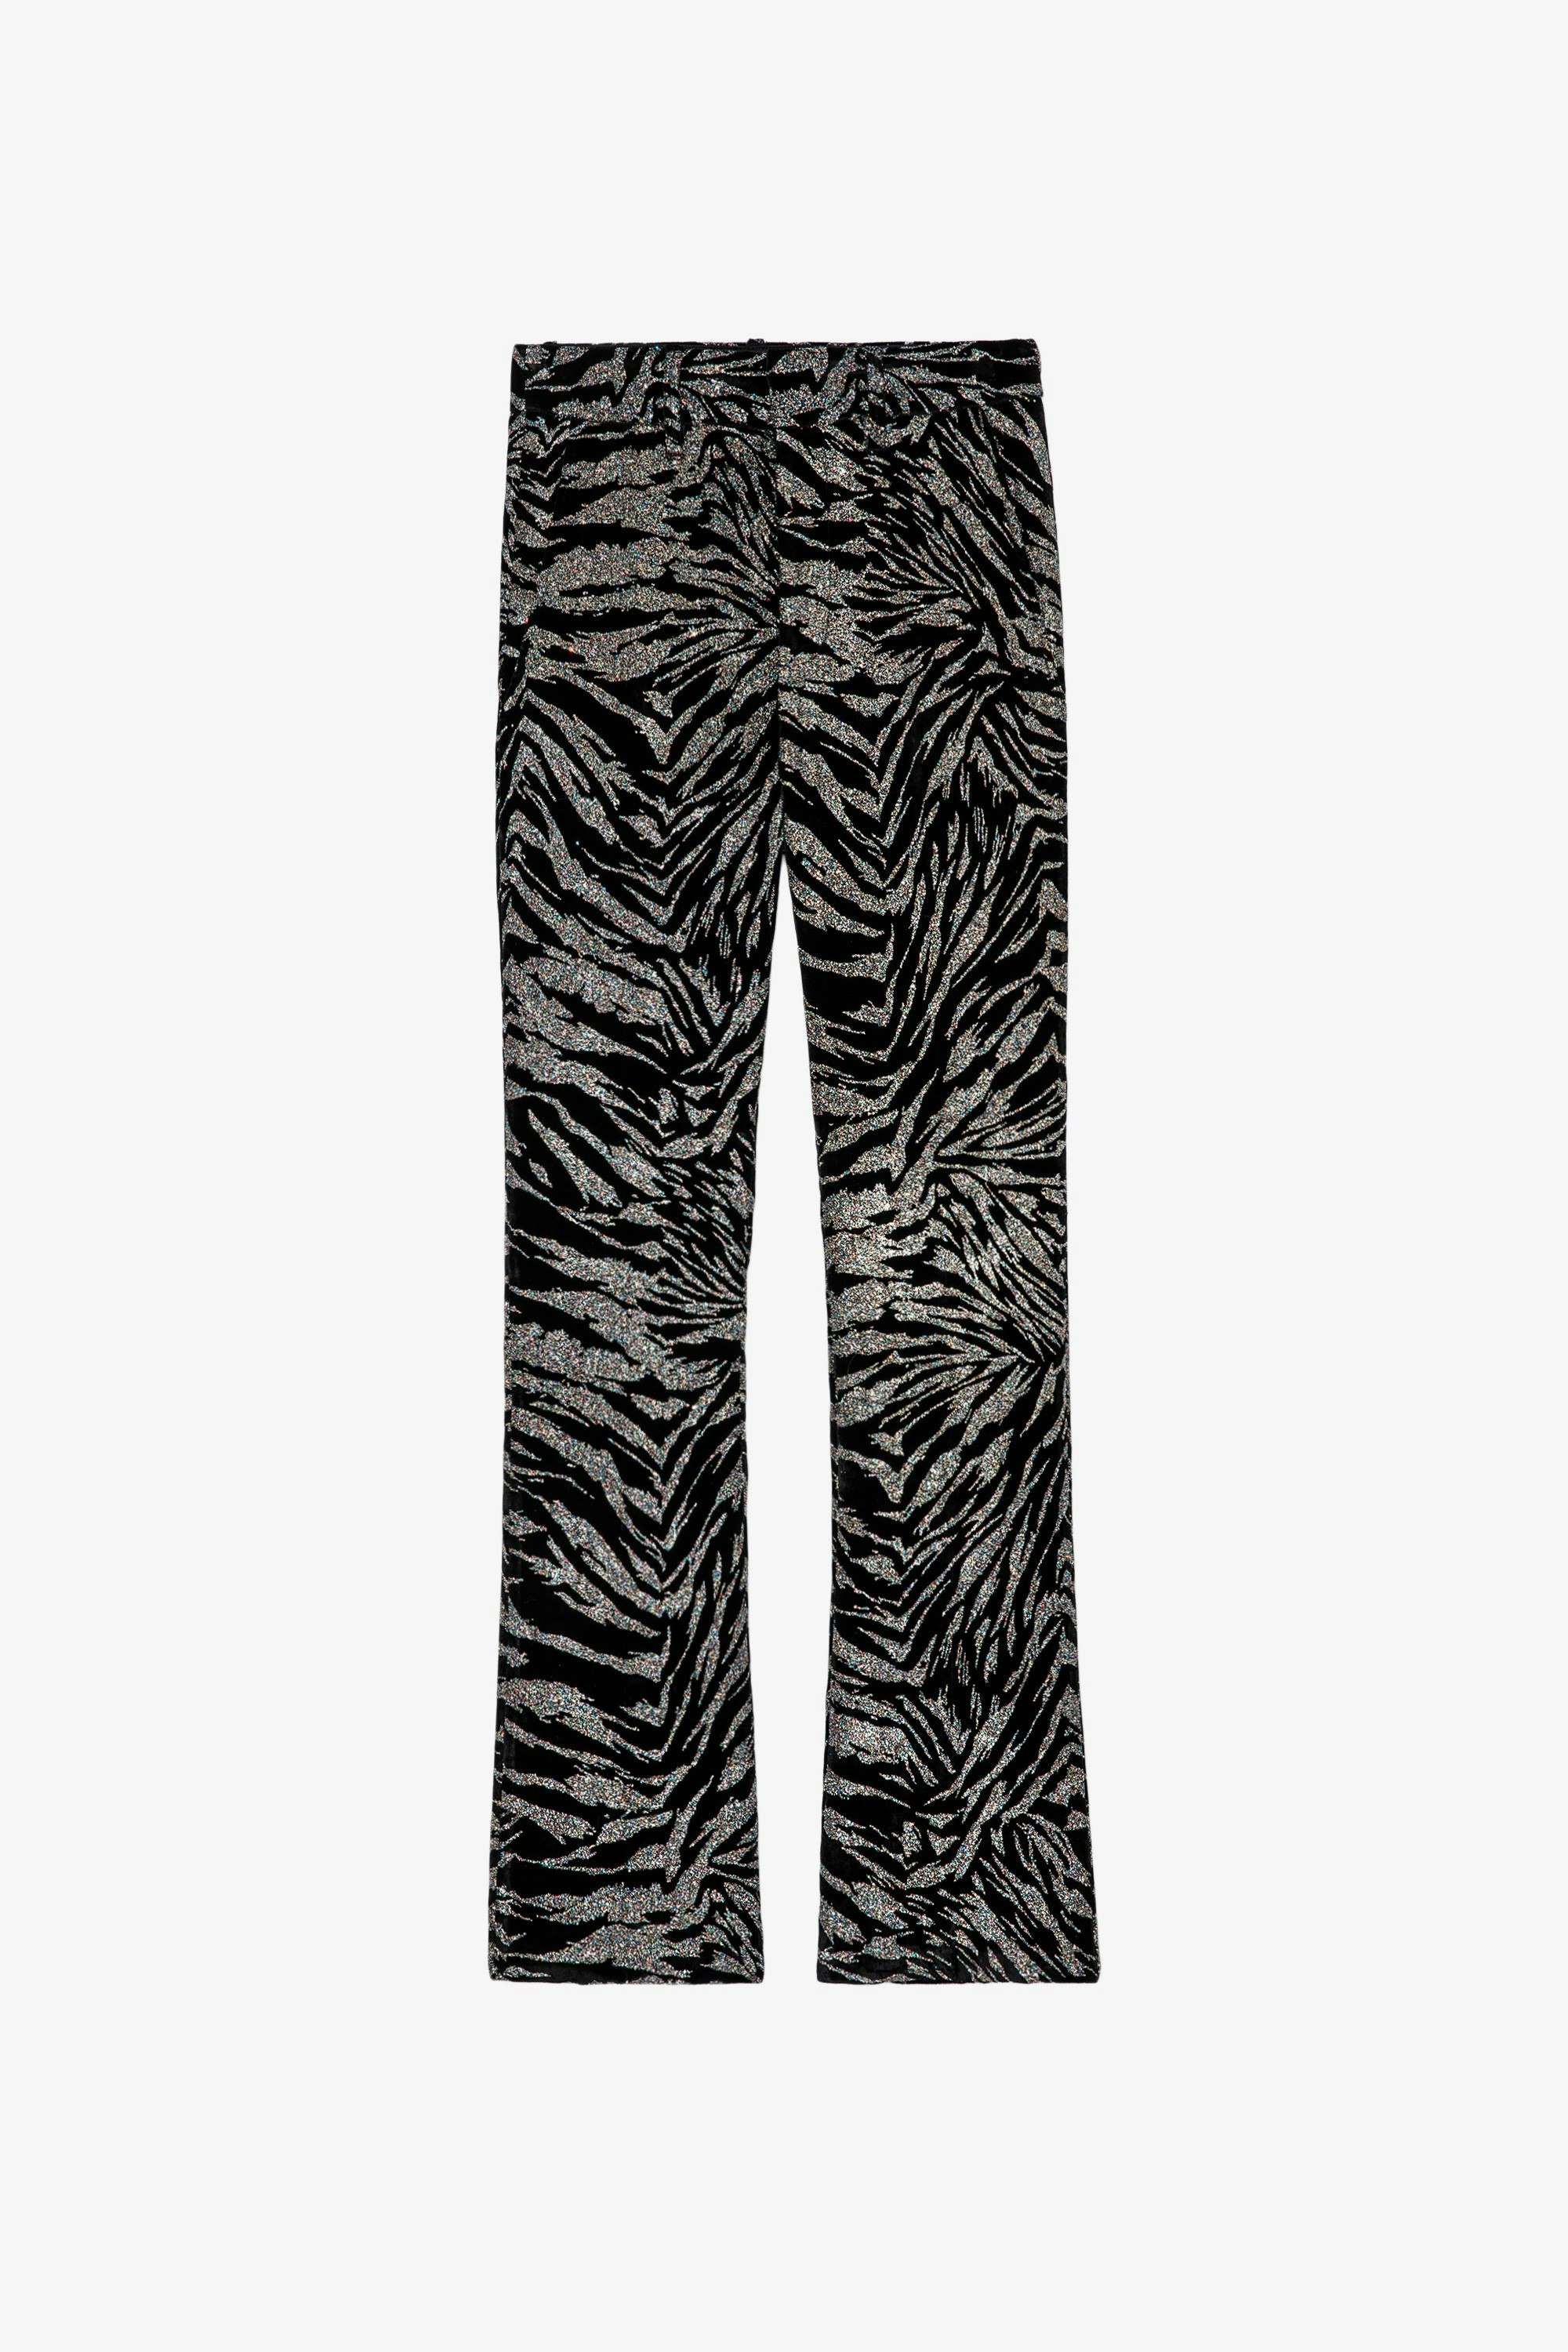 Polis Trousers Women’s velvet trousers with a glittery motif 